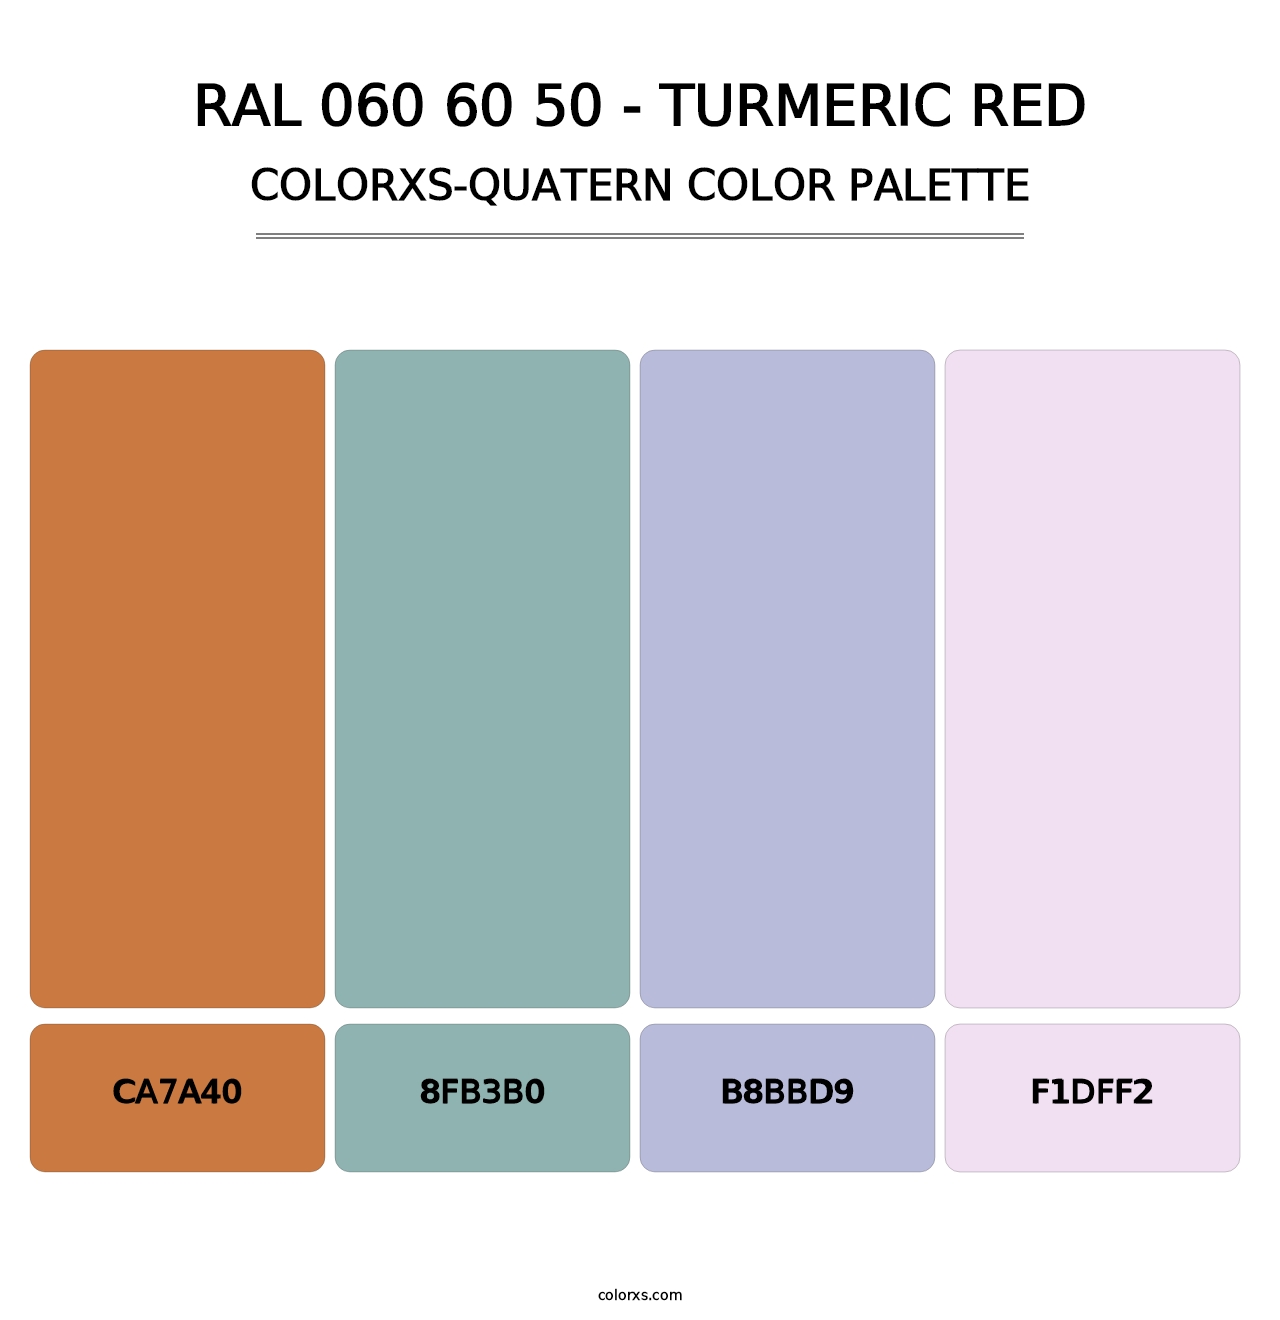 RAL 060 60 50 - Turmeric Red - Colorxs Quatern Palette